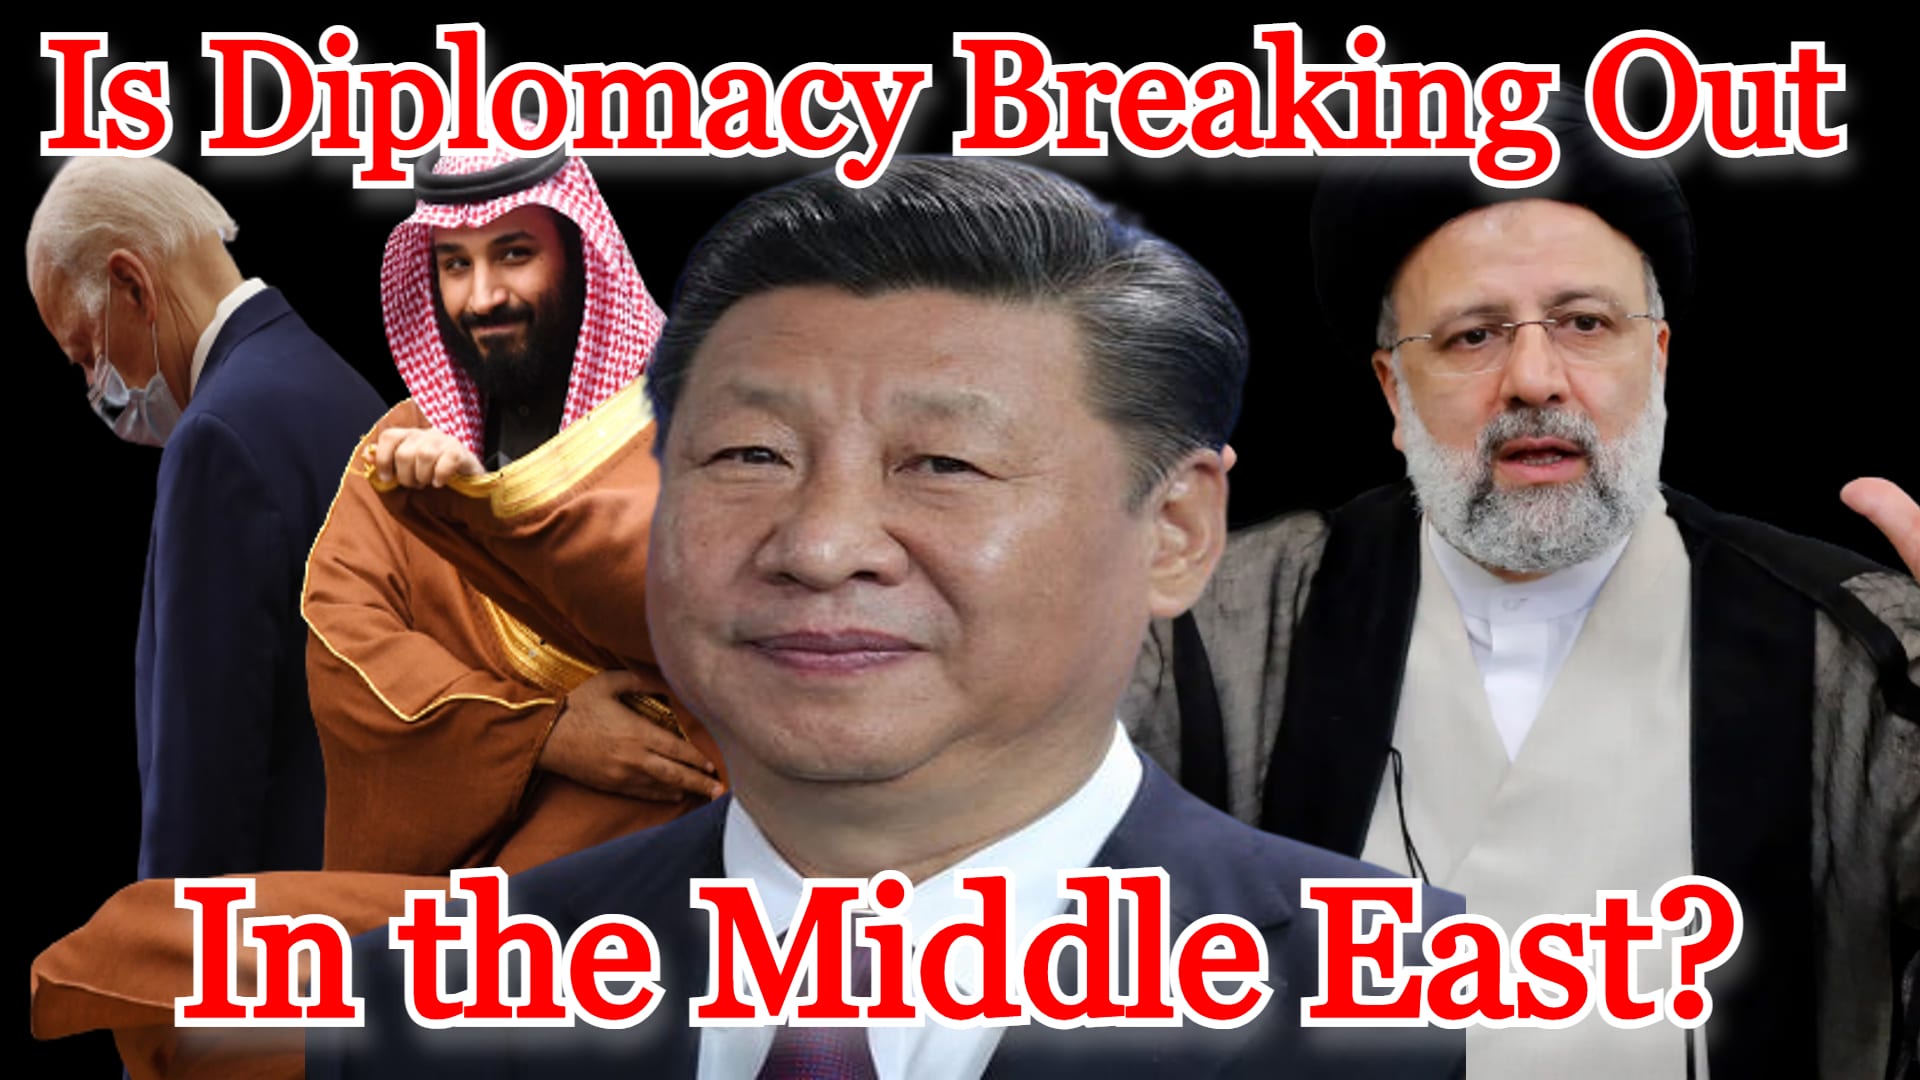 COI #400: Is Diplomacy Breaking Out in the Middle East?